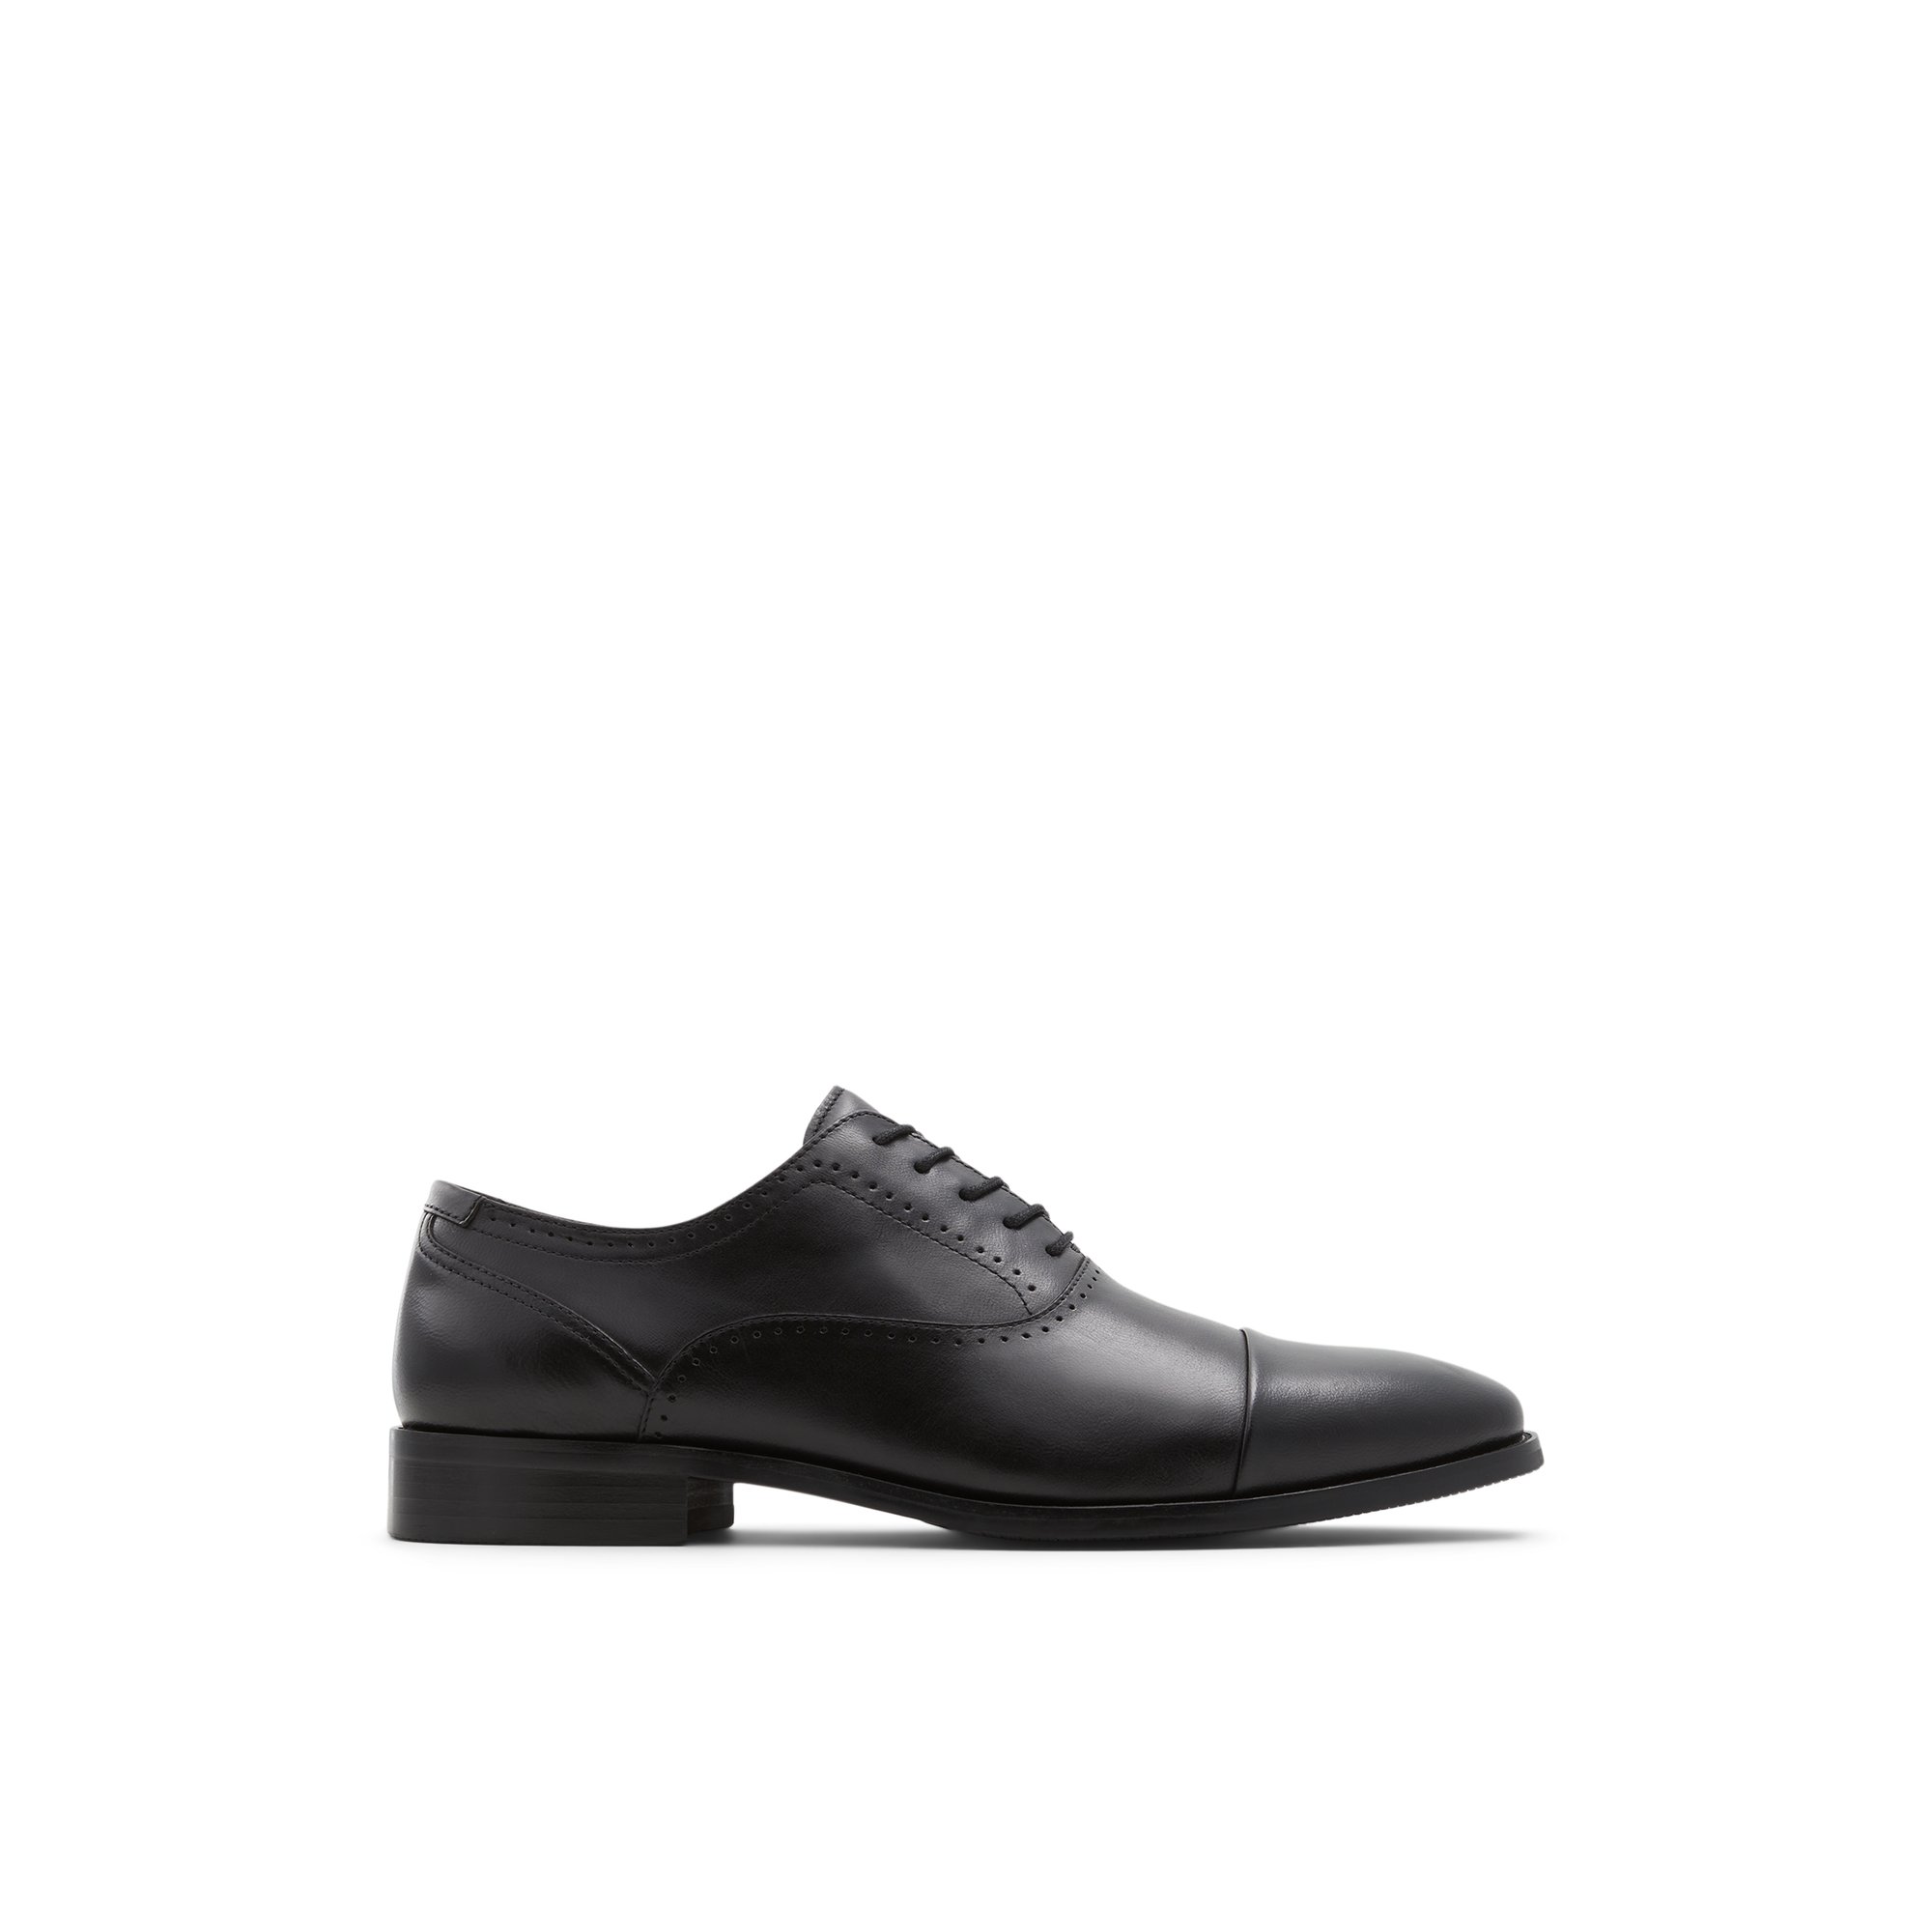 Image of ALDO Abawienflex - Men's Oxfords and Lace up - Black, Size 9.5